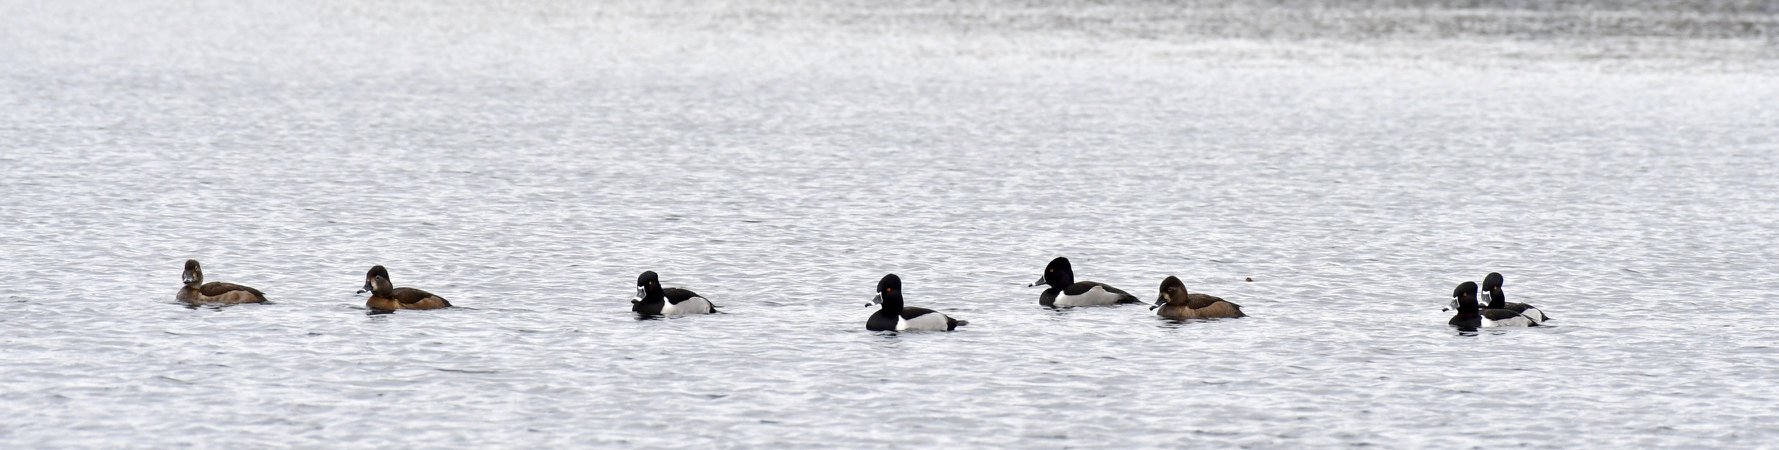 Ringed neck ducks Greg Harber Patton Park Be on the lookout Birmingham for wintering birds in town (photos)